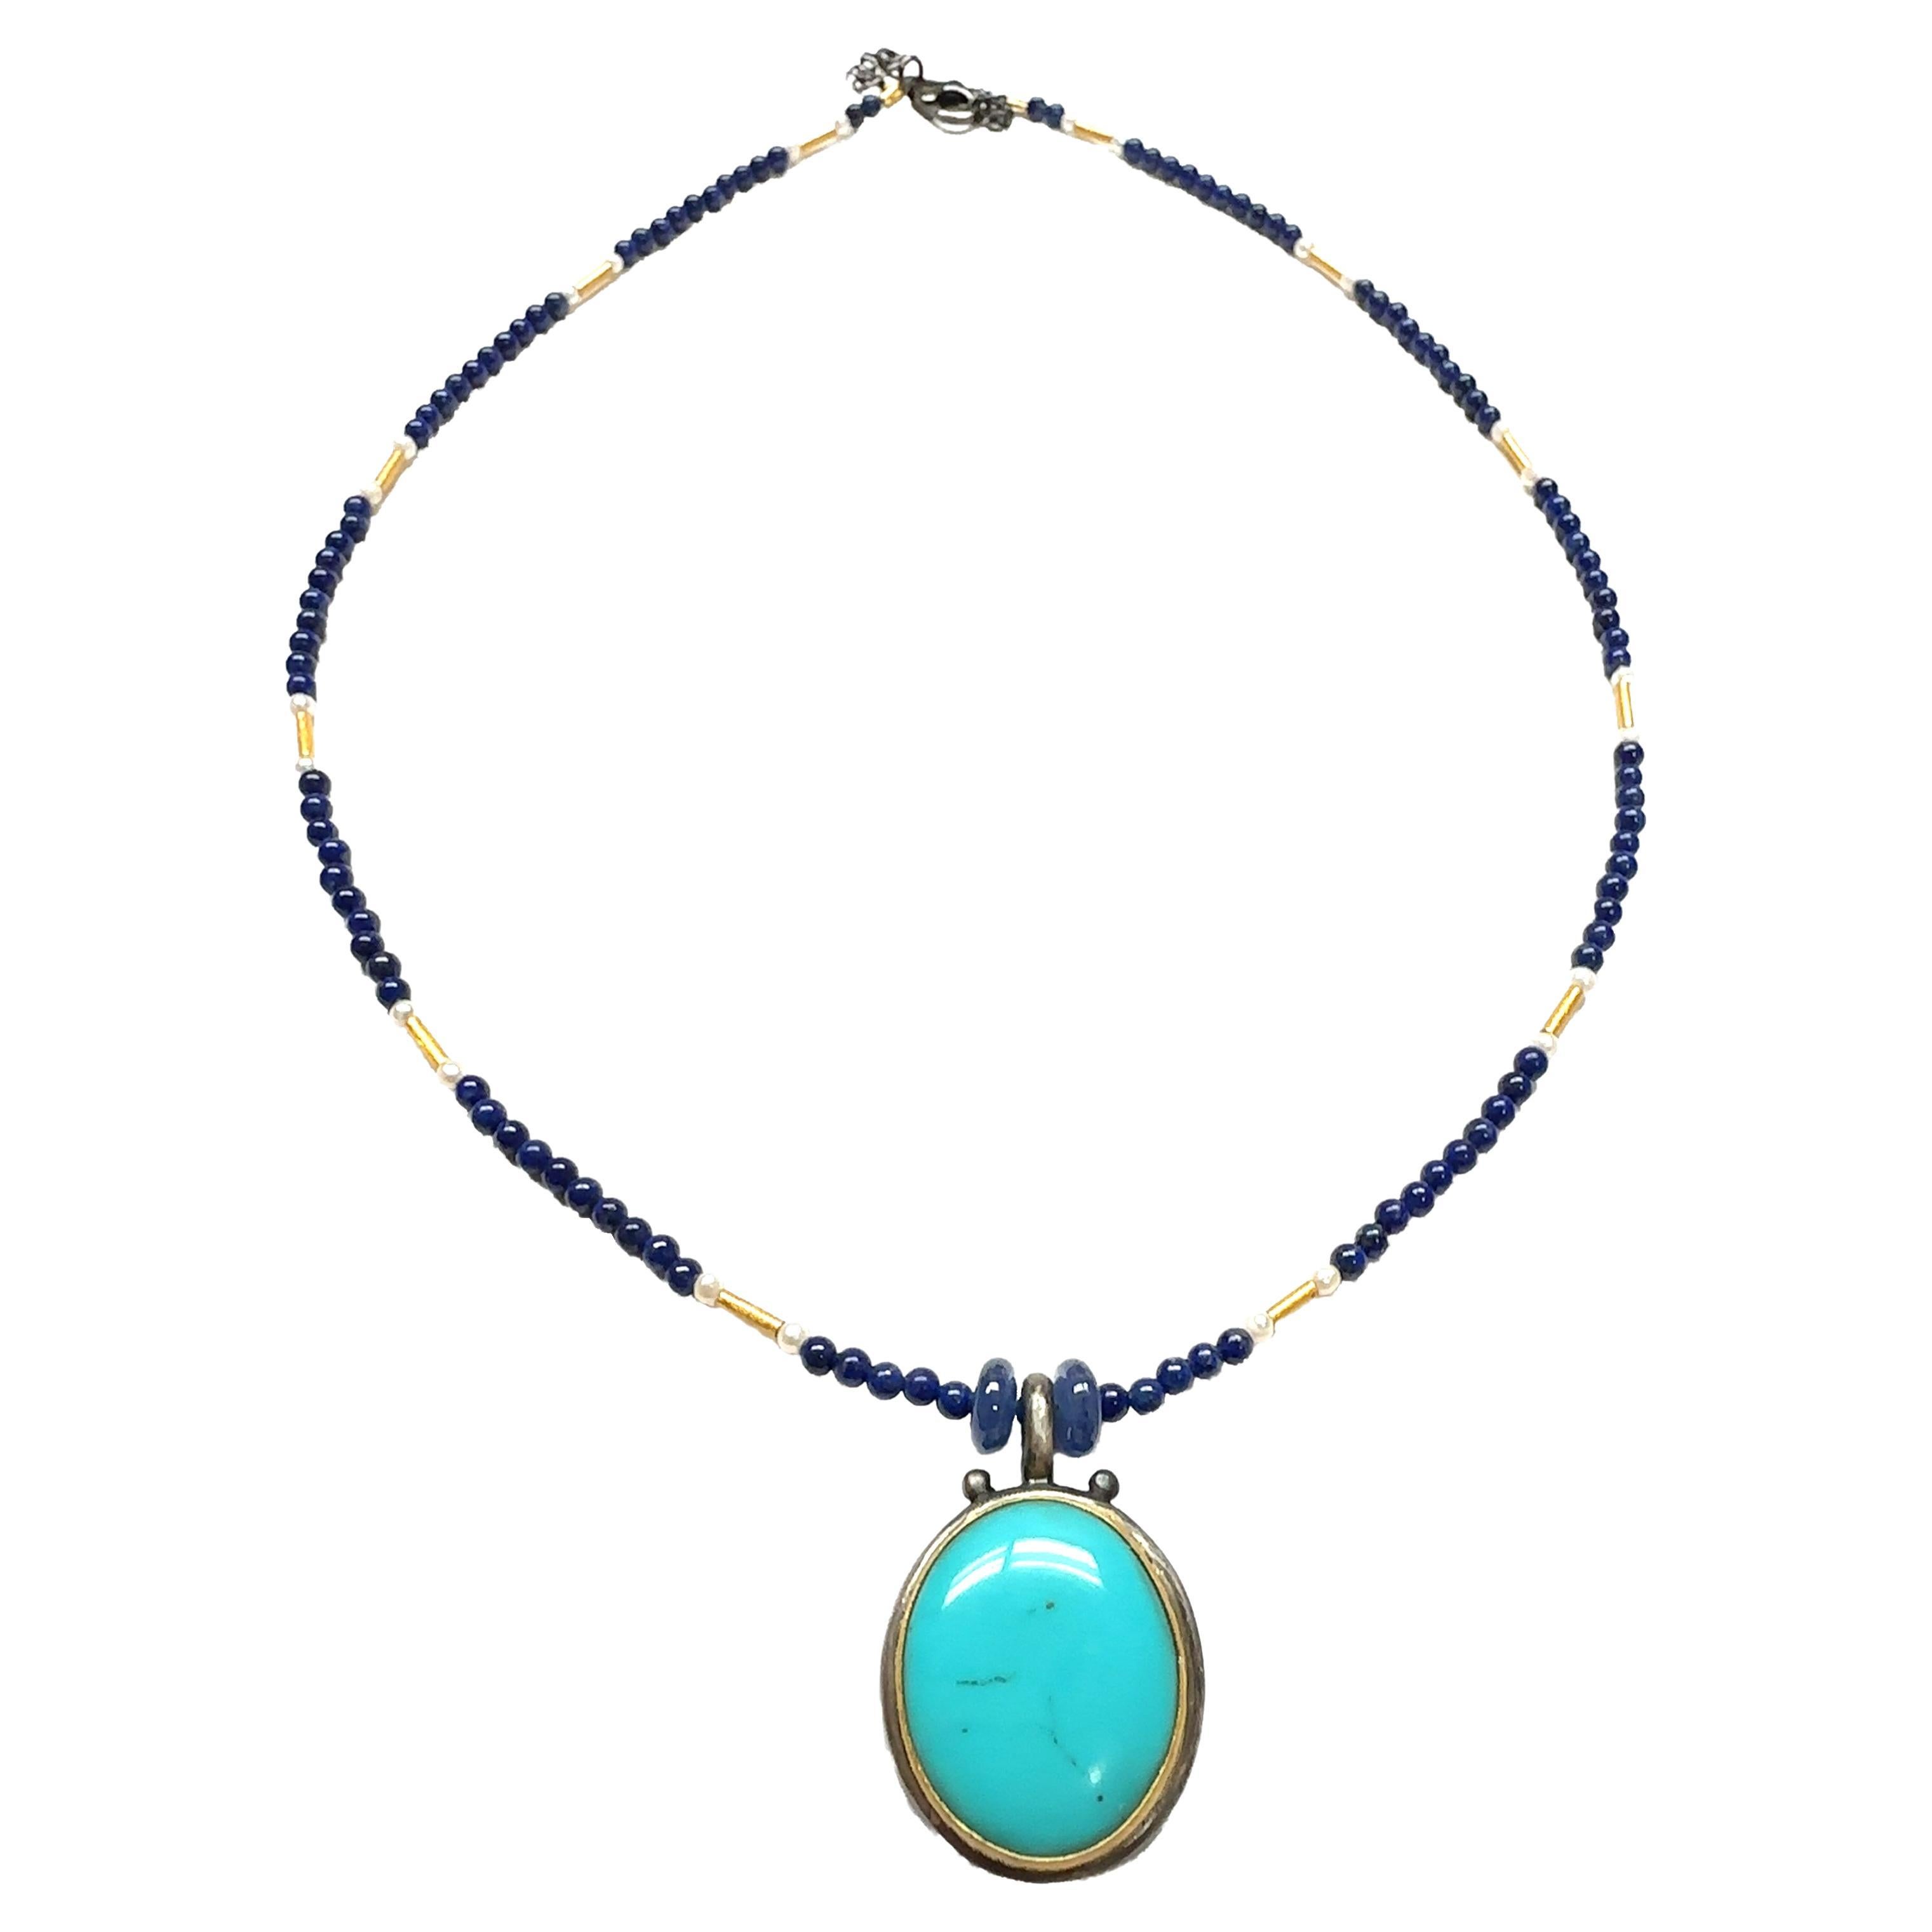 JAS-19-1843 - 24K/SS HANDMADE 18” NECKLACE w 20X17MM NATURAL KINGMAN TURQUOISE For Sale